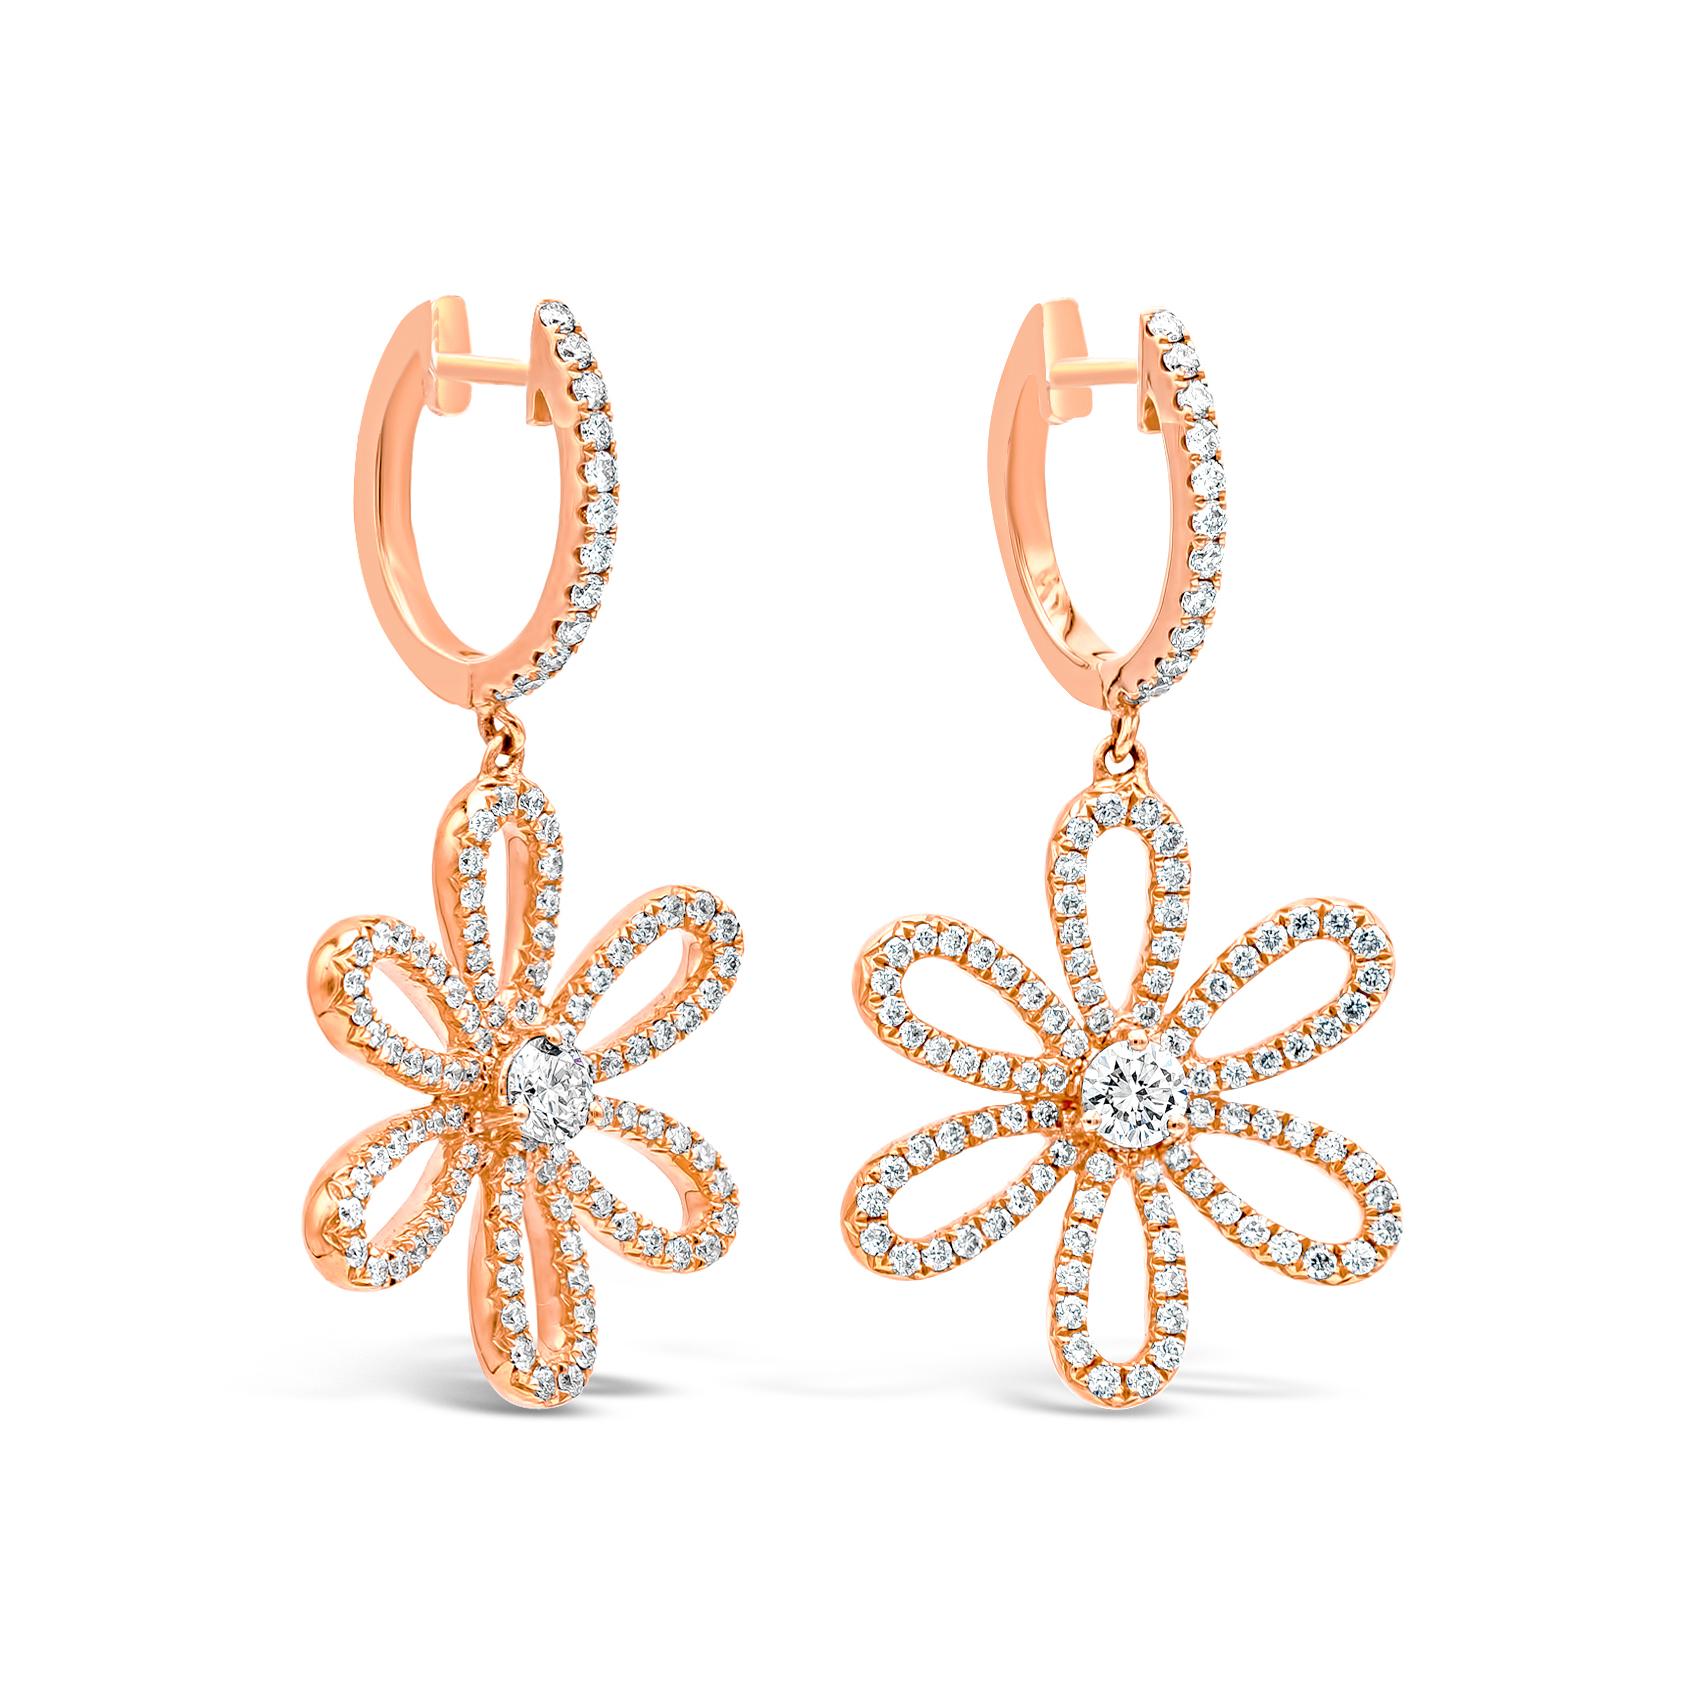 A fashionable pair of dangle earrings showcasing round brilliant diamonds. Diamonds weigh 1.02 carats total; E-F color and VS - VVS clarity. This beautiful piece of jewelry set in an elegant flower design made in 18k rose gold.

Roman Malakov is a